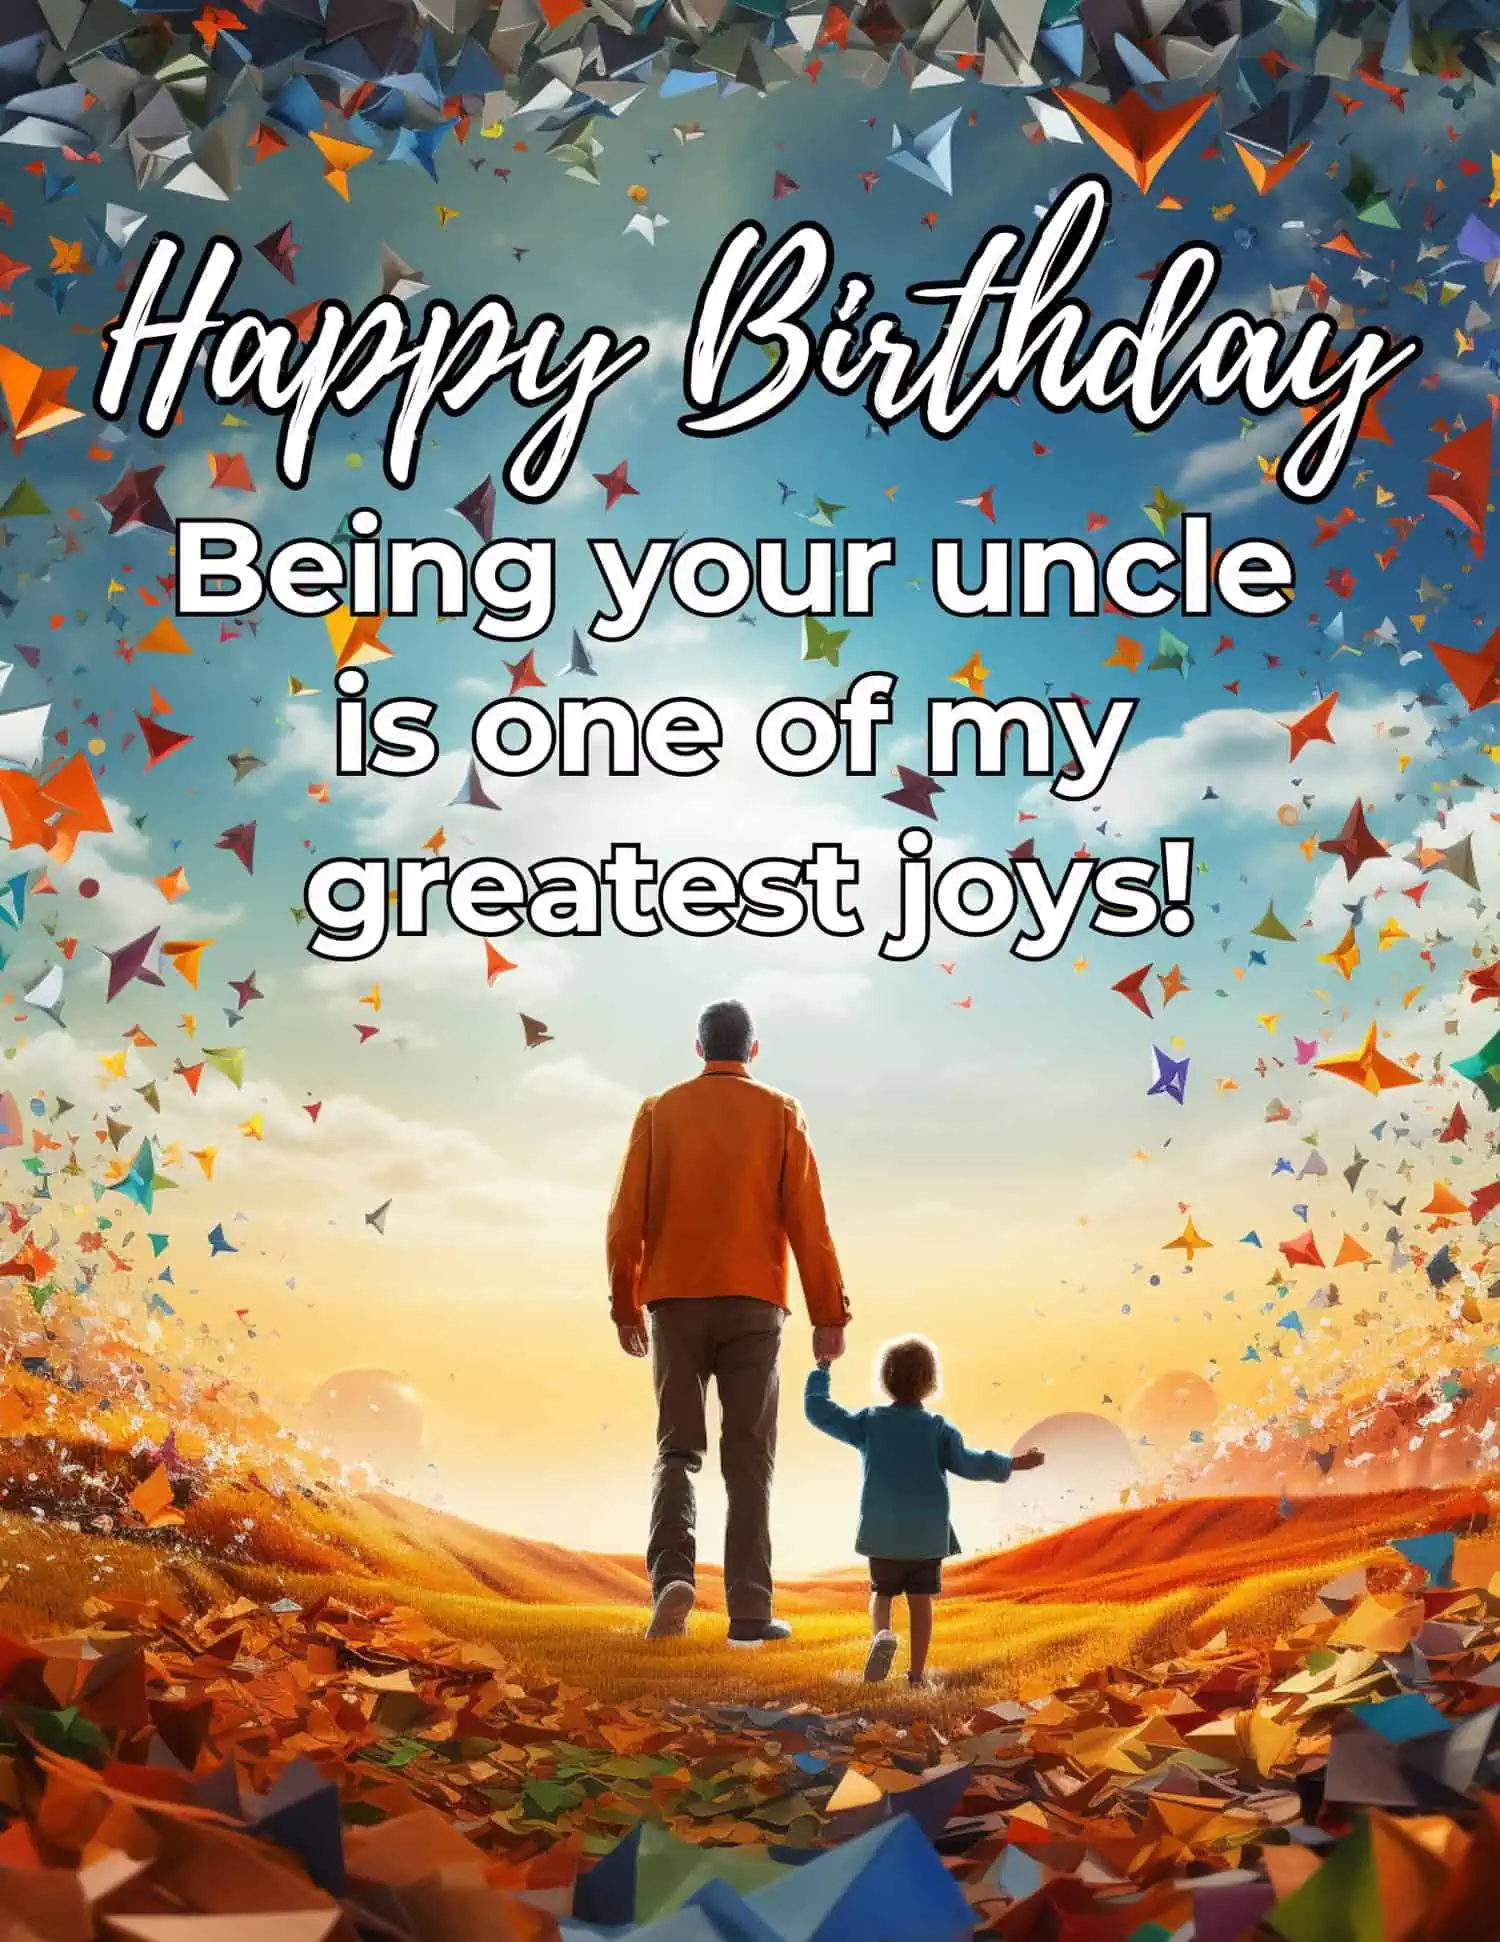 A compilation of fun and heartfelt birthday wishes from an uncle to his nephew.